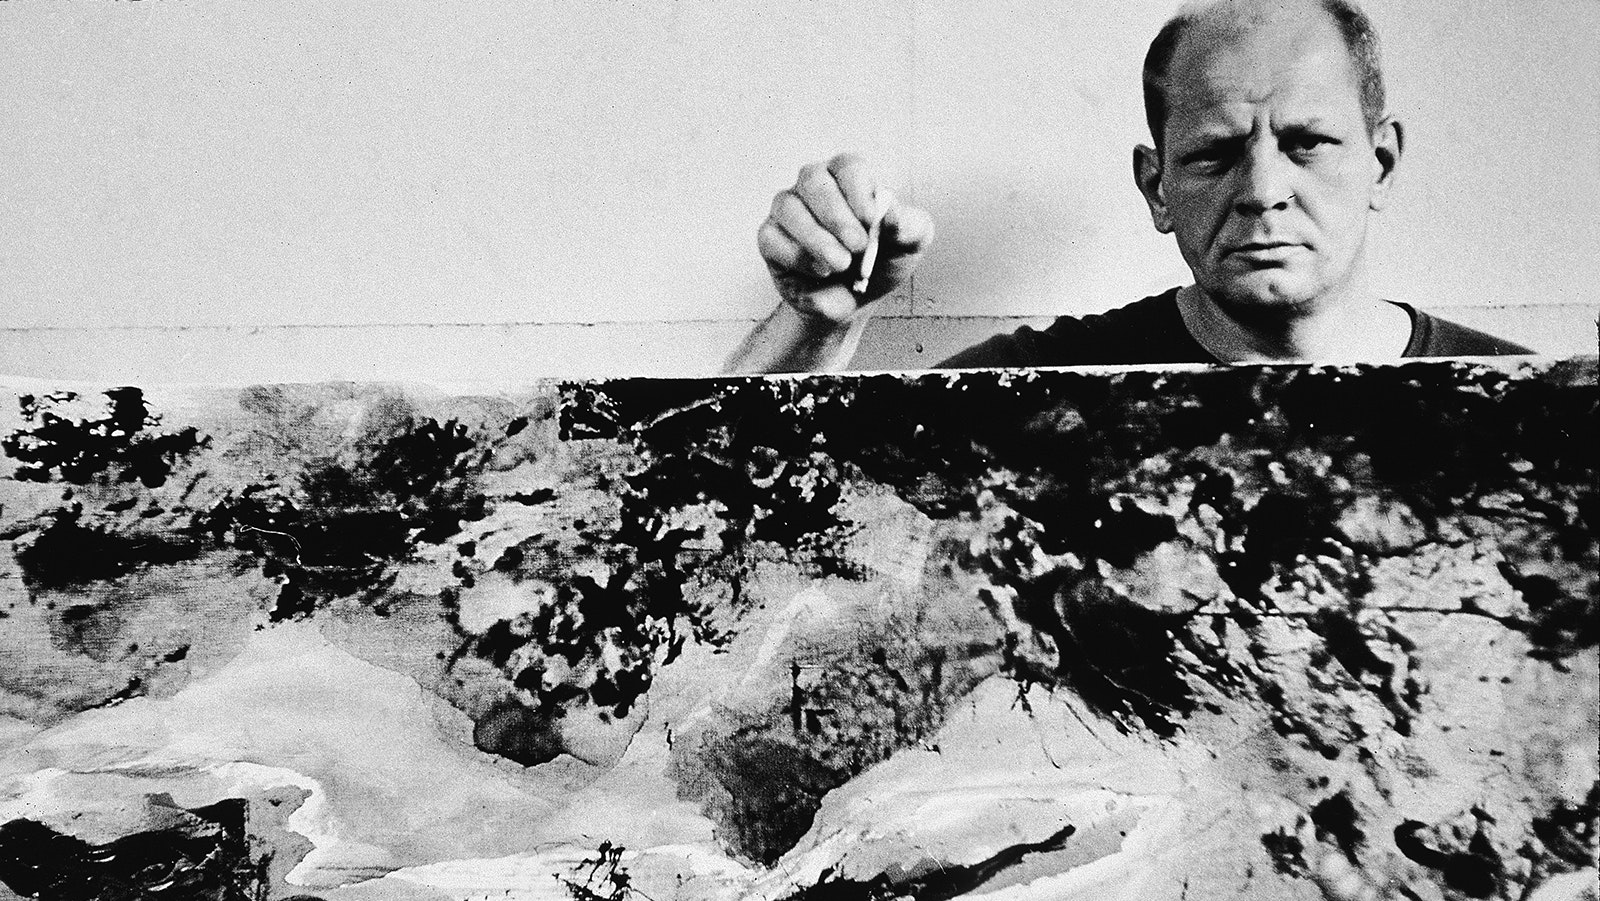 Jackson Pollock Getty Images 56898334 11 4 23